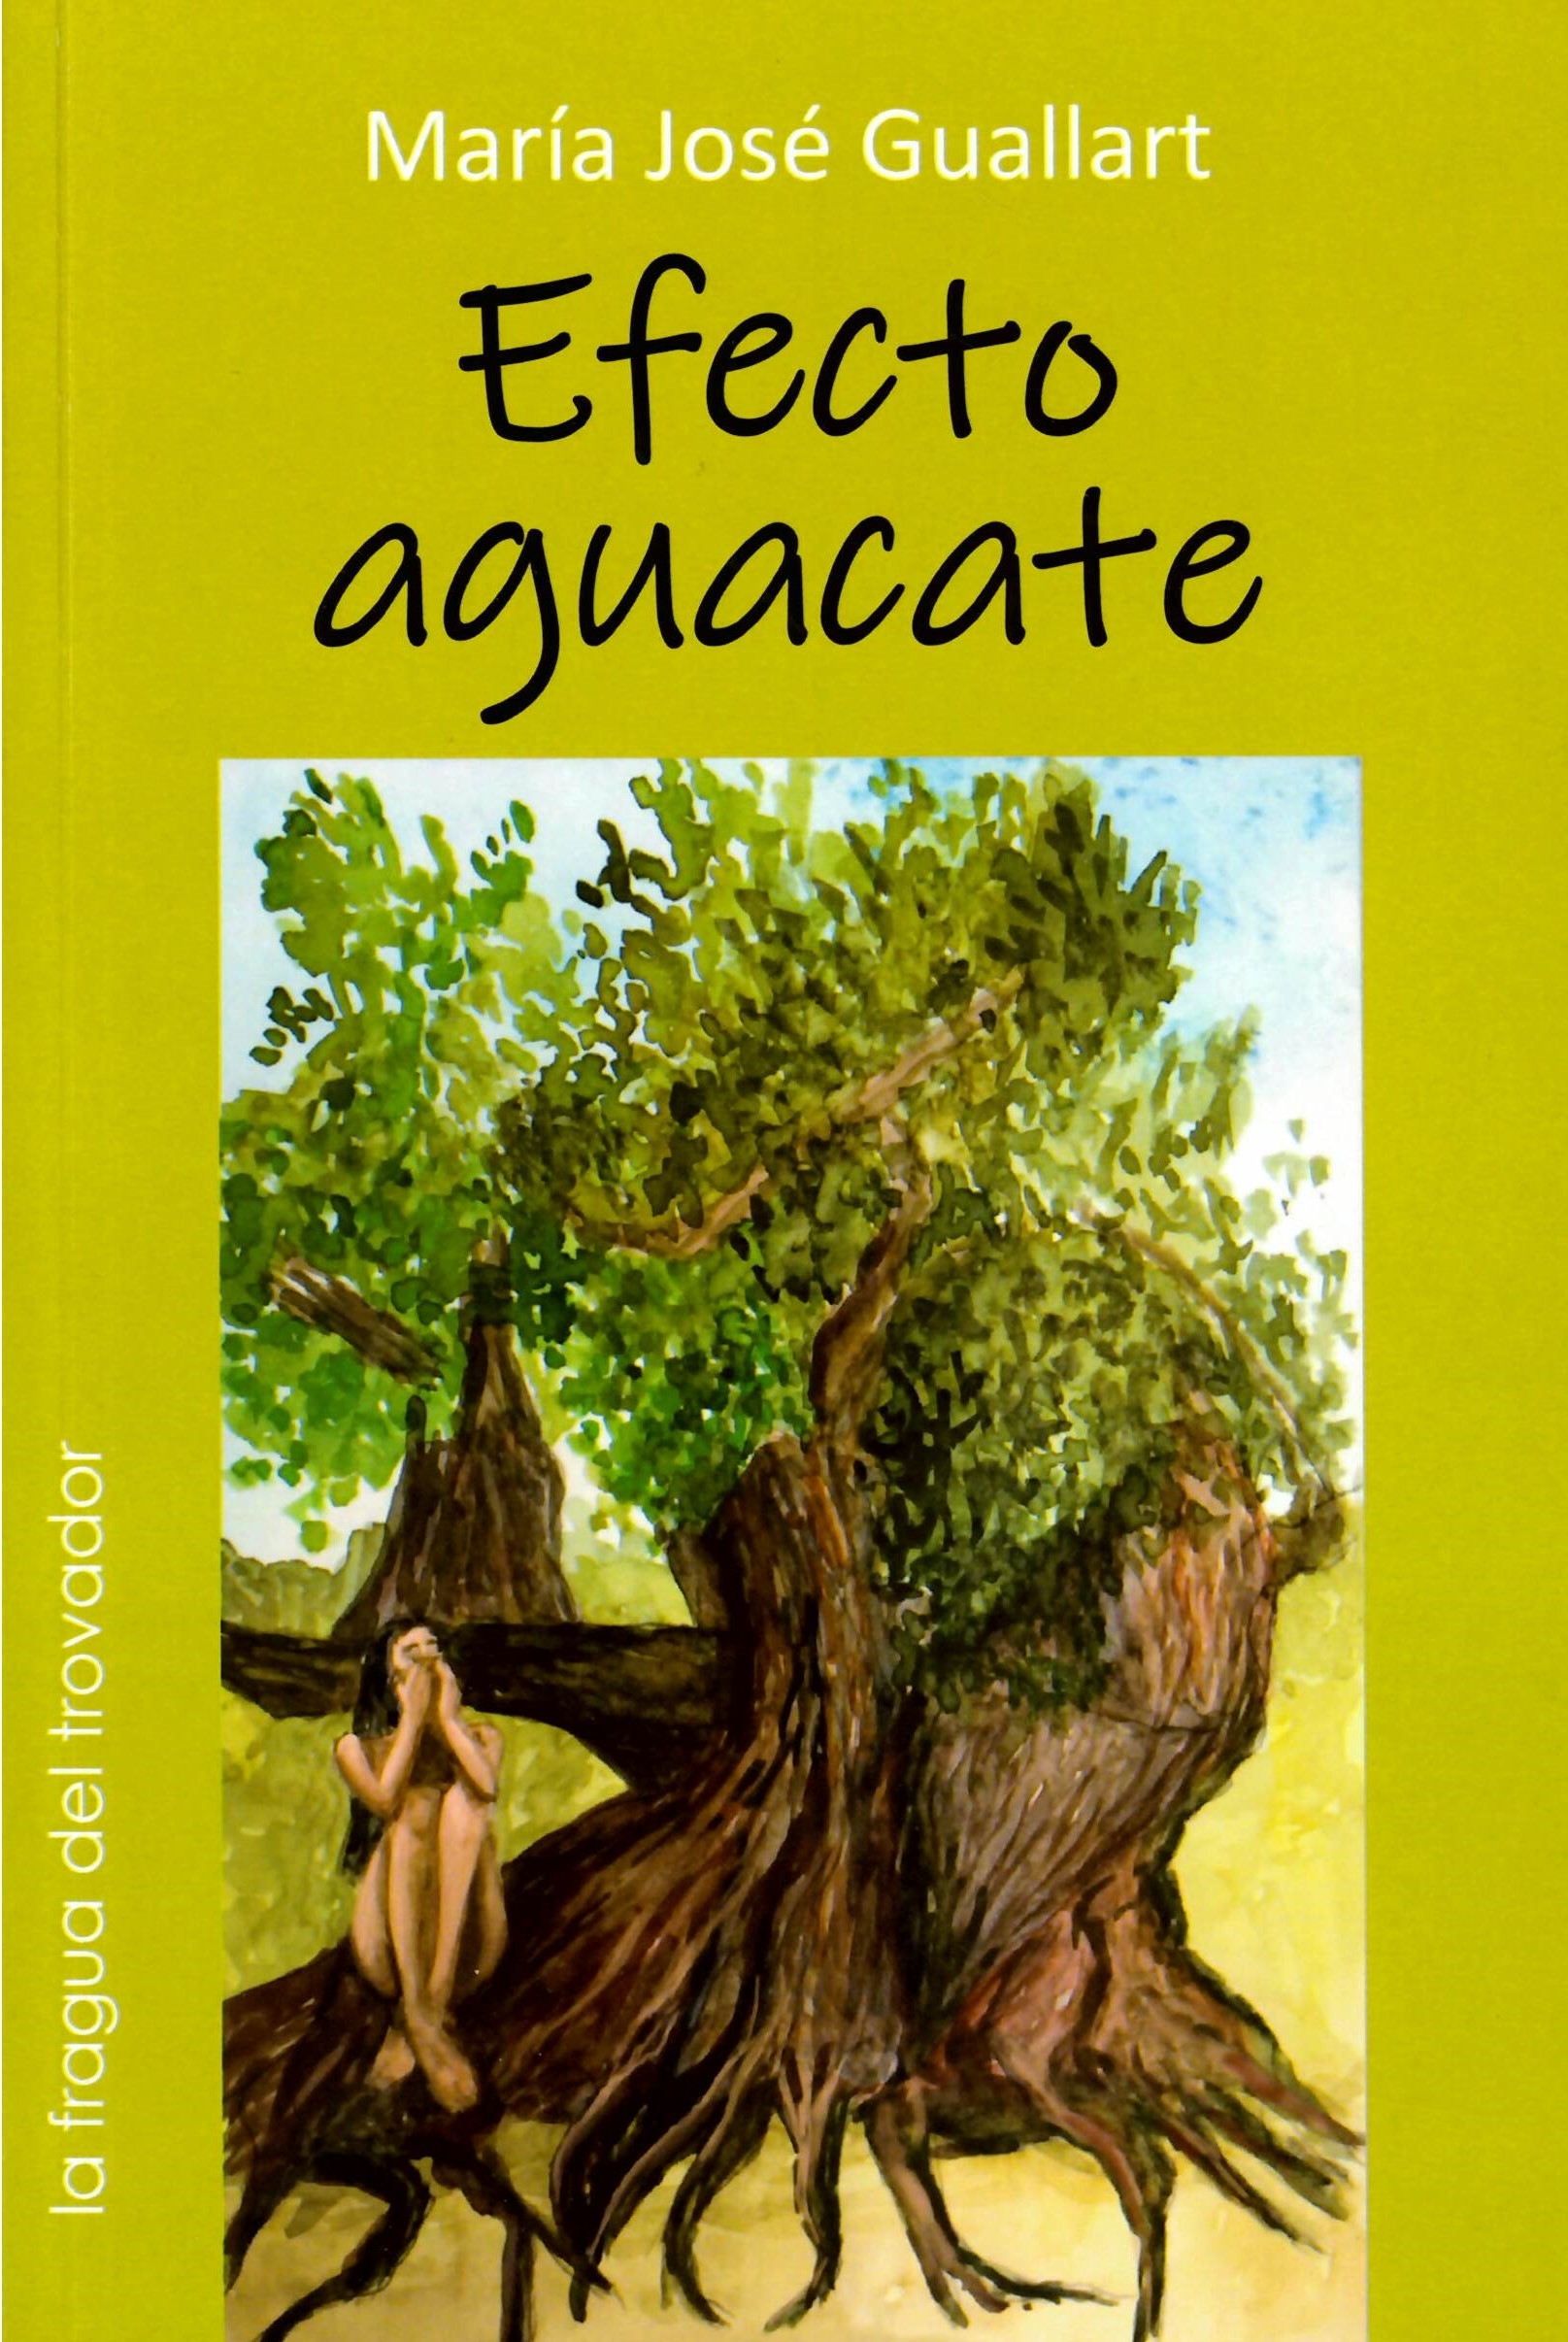 EFECTO AGUACATE